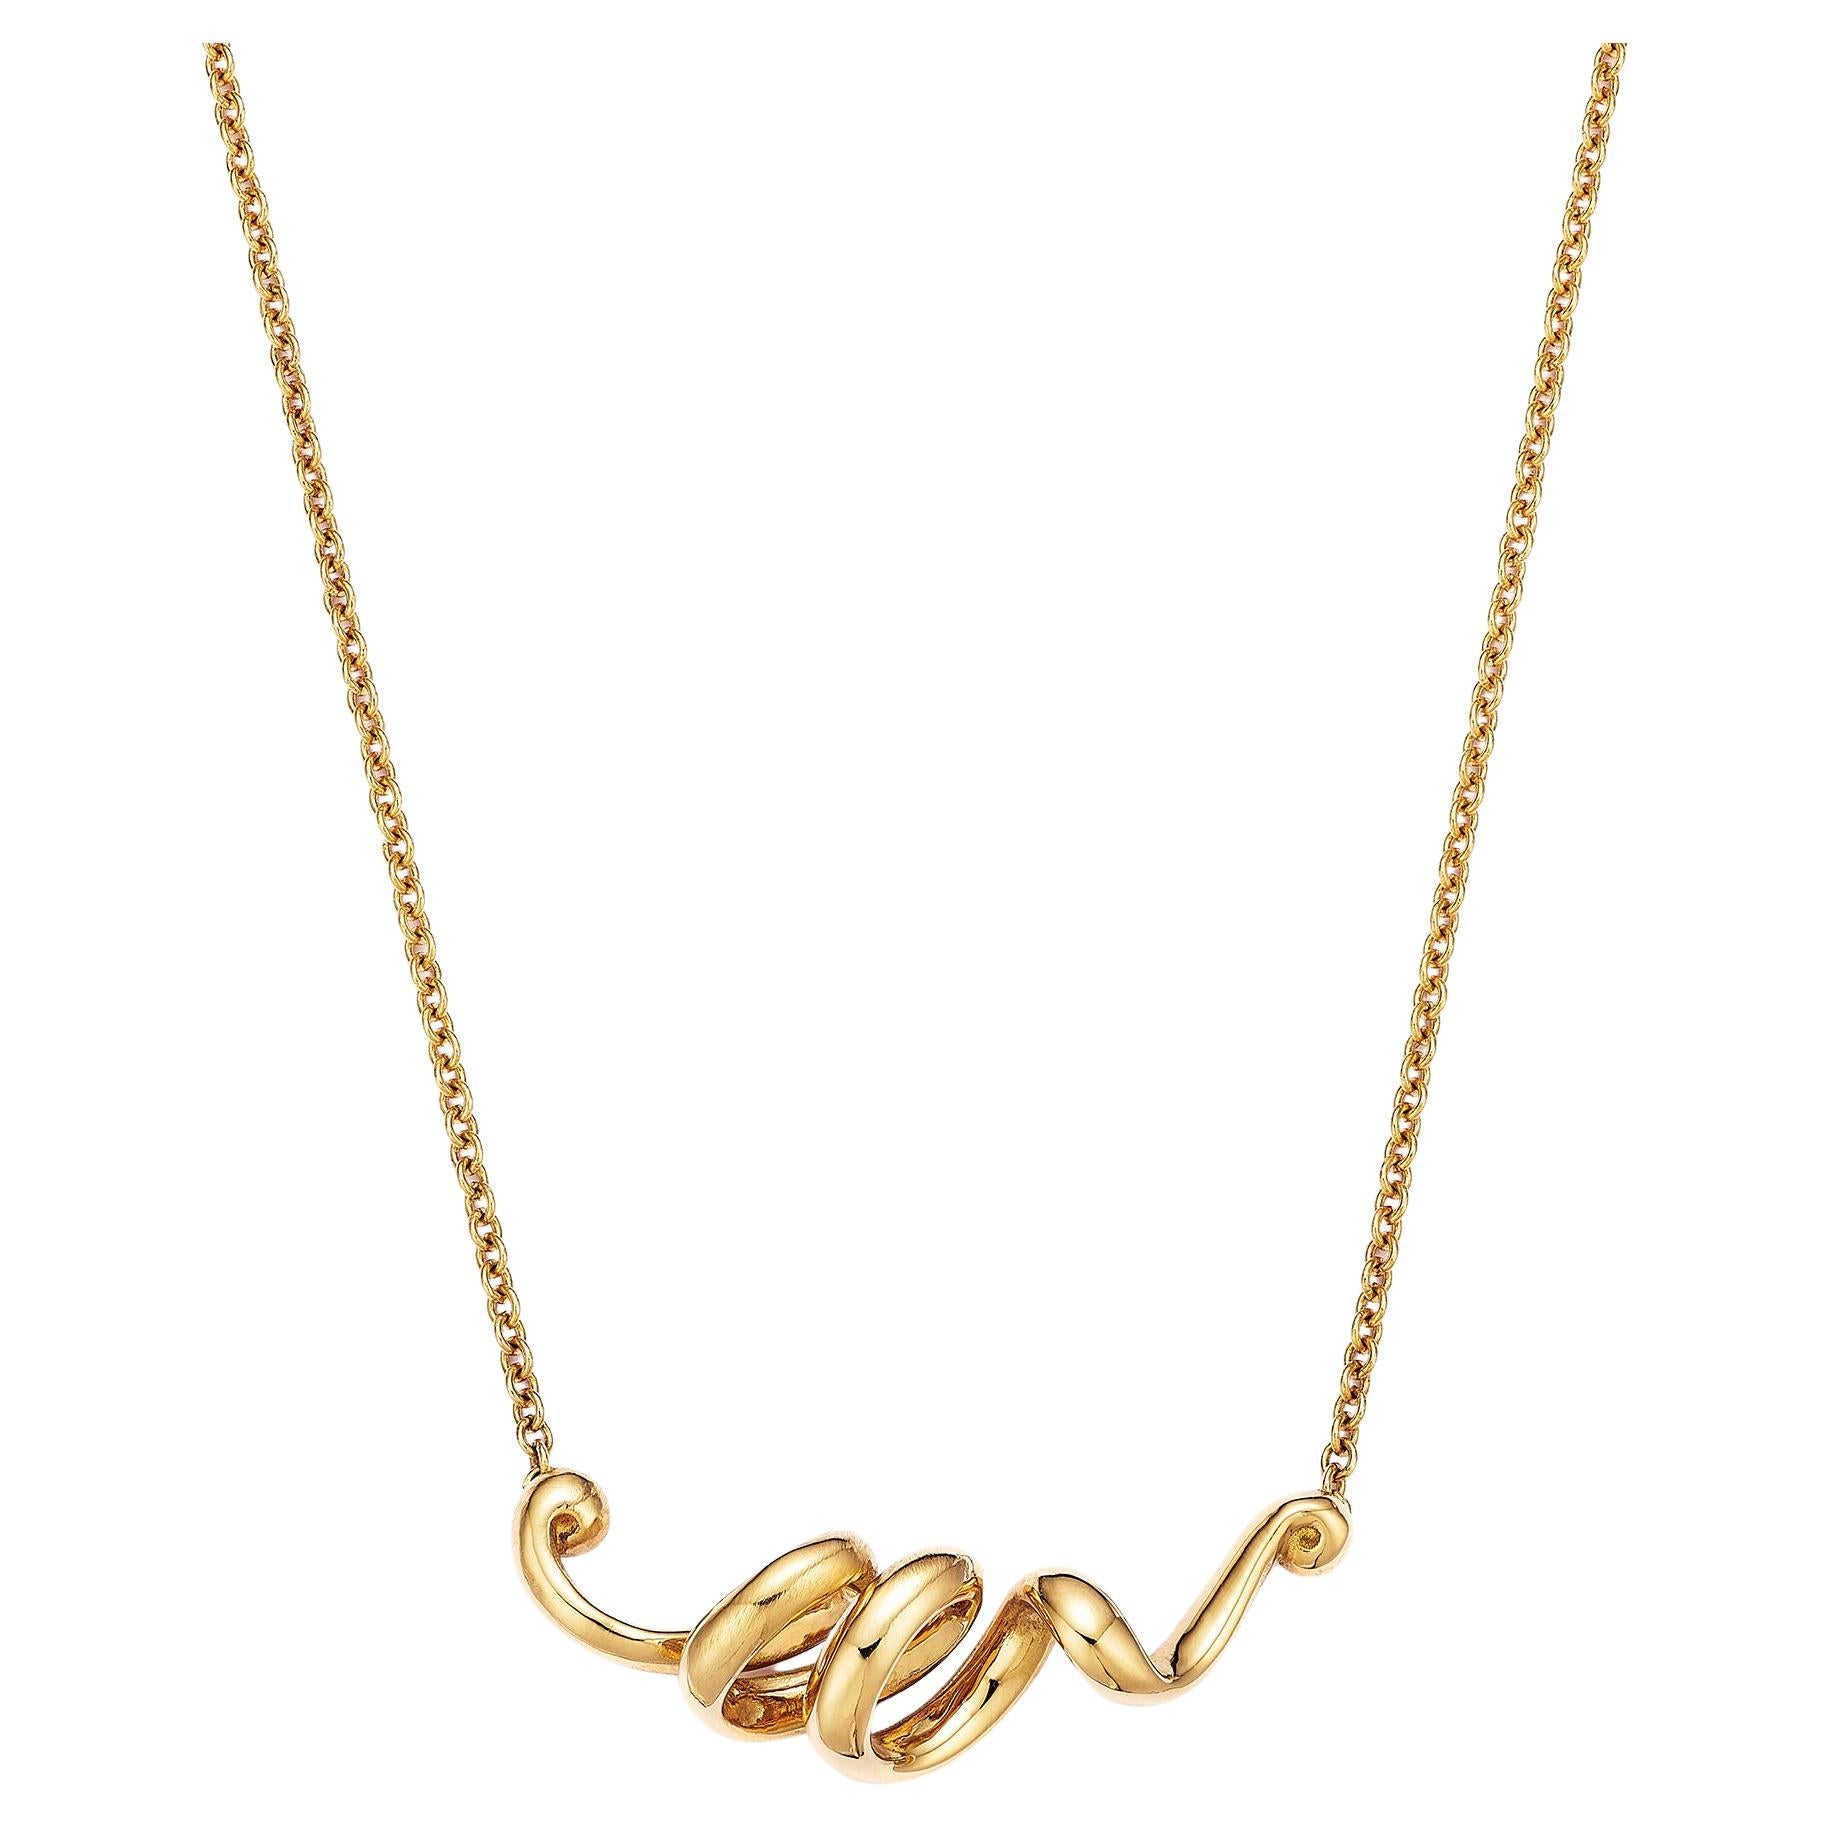 Spira Spiral Necklace in 18kt Fairmined Ecological Yellow Gold For Sale